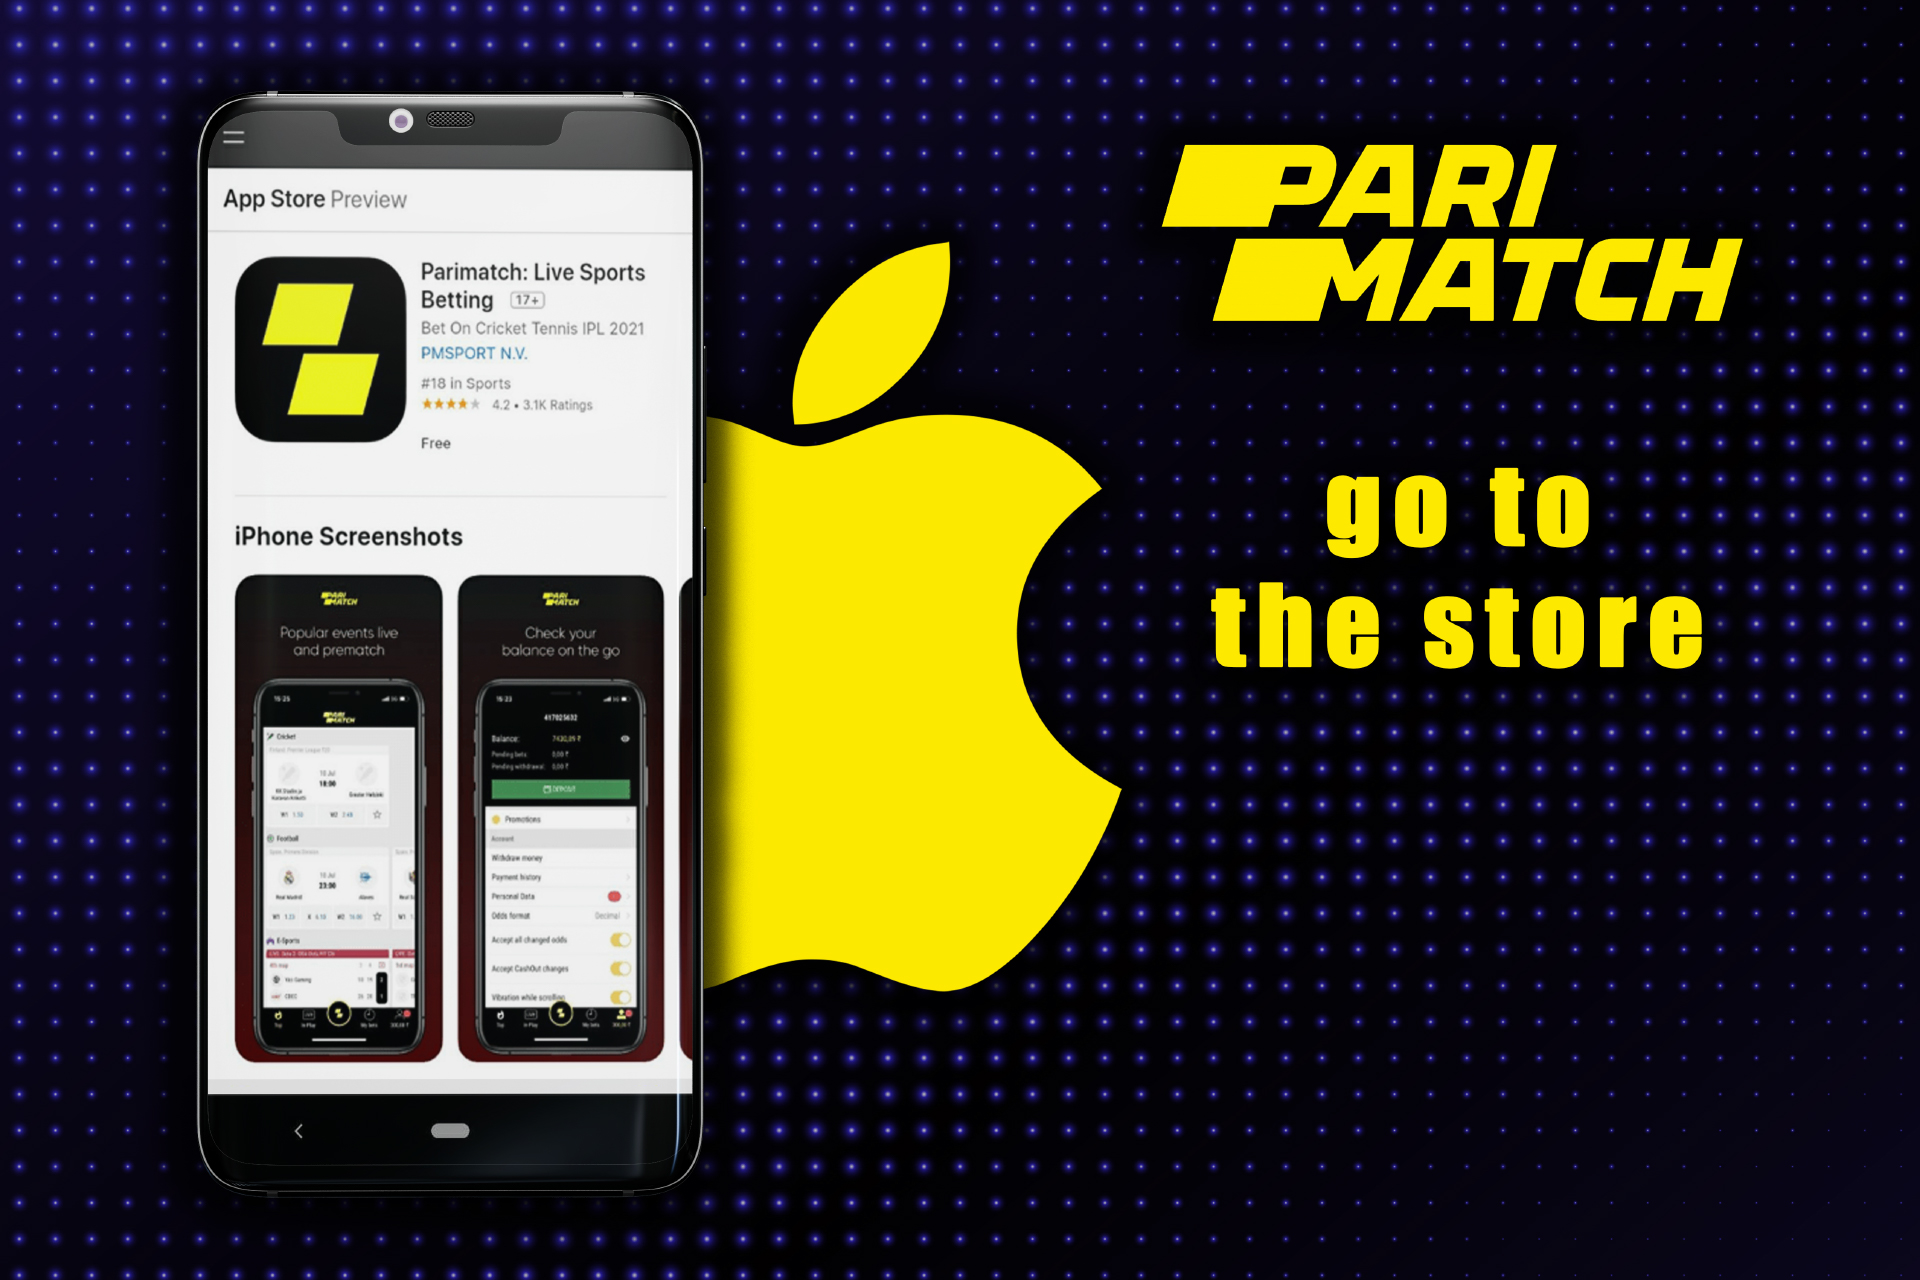 Open the App Store and find the Parimatch app.